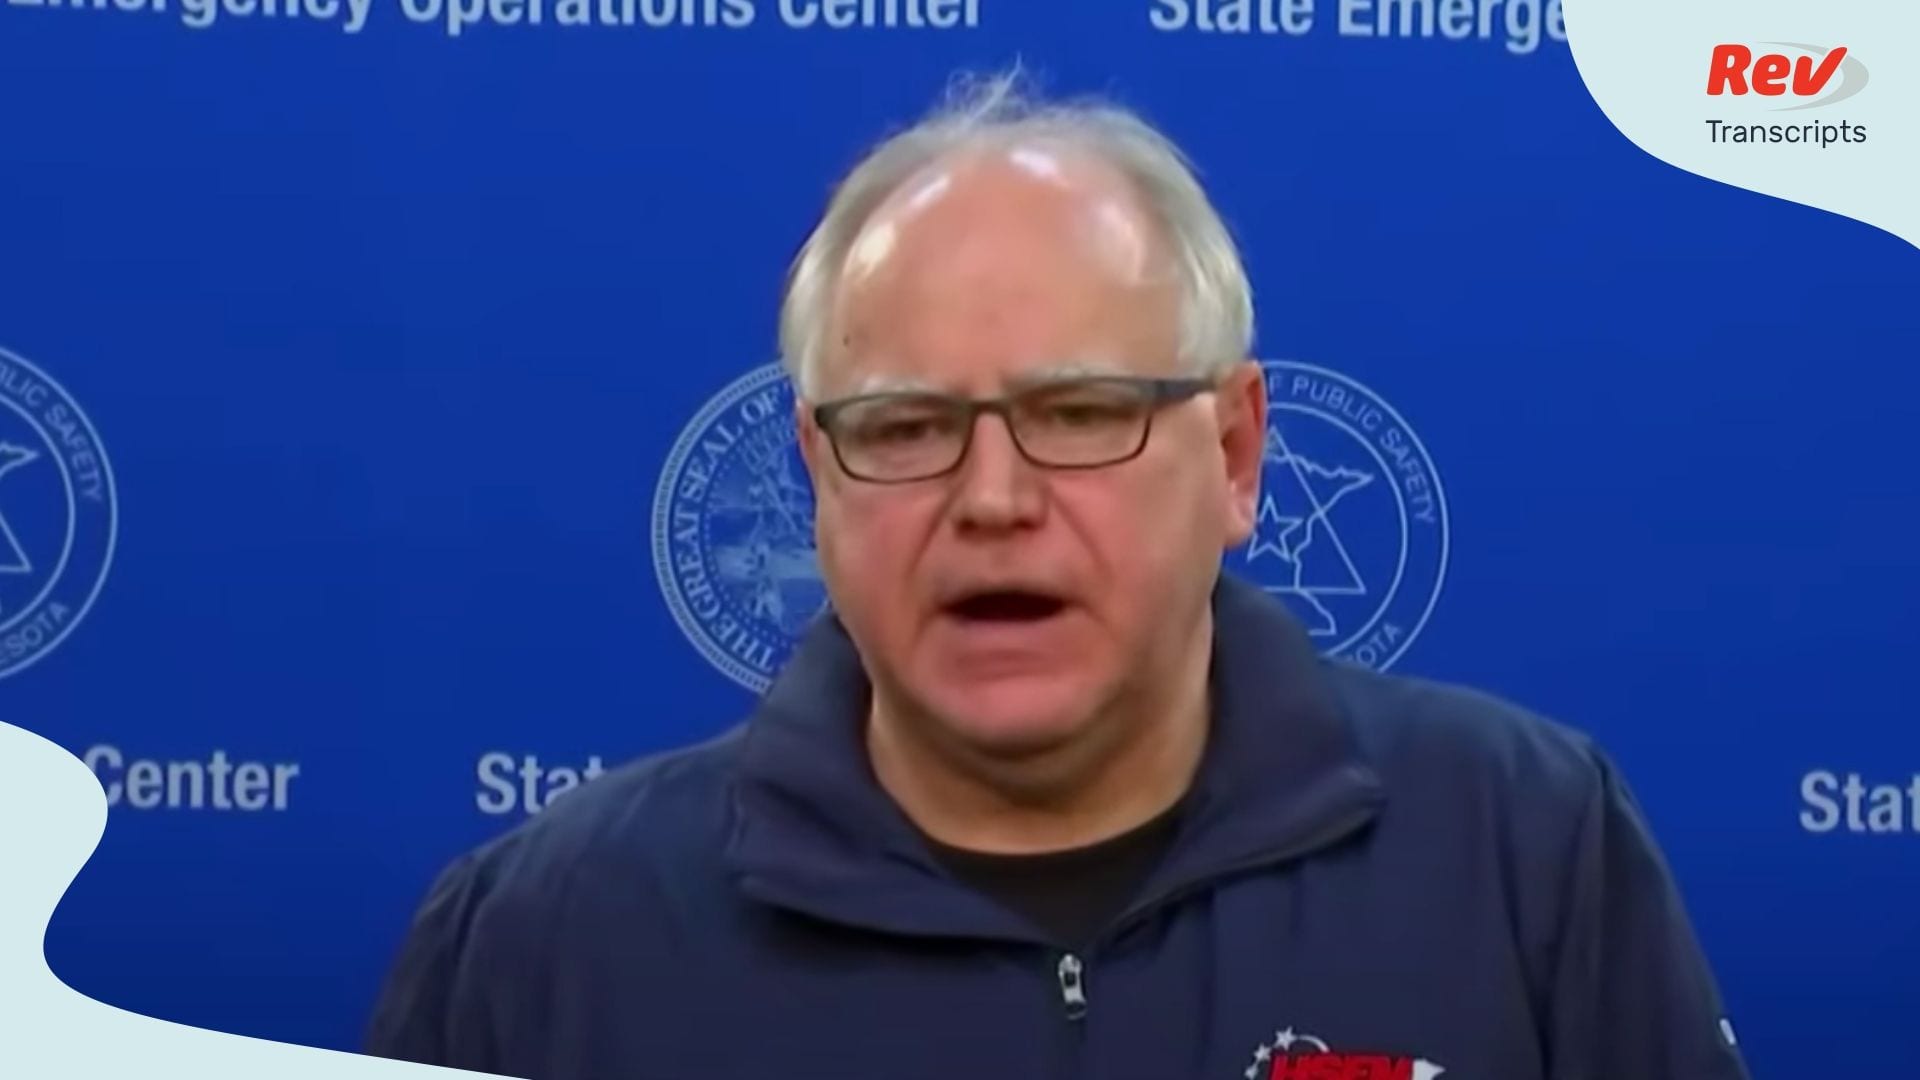 Governor Tim Walz Mayor Frey Press Conference Fourth Night of Protests